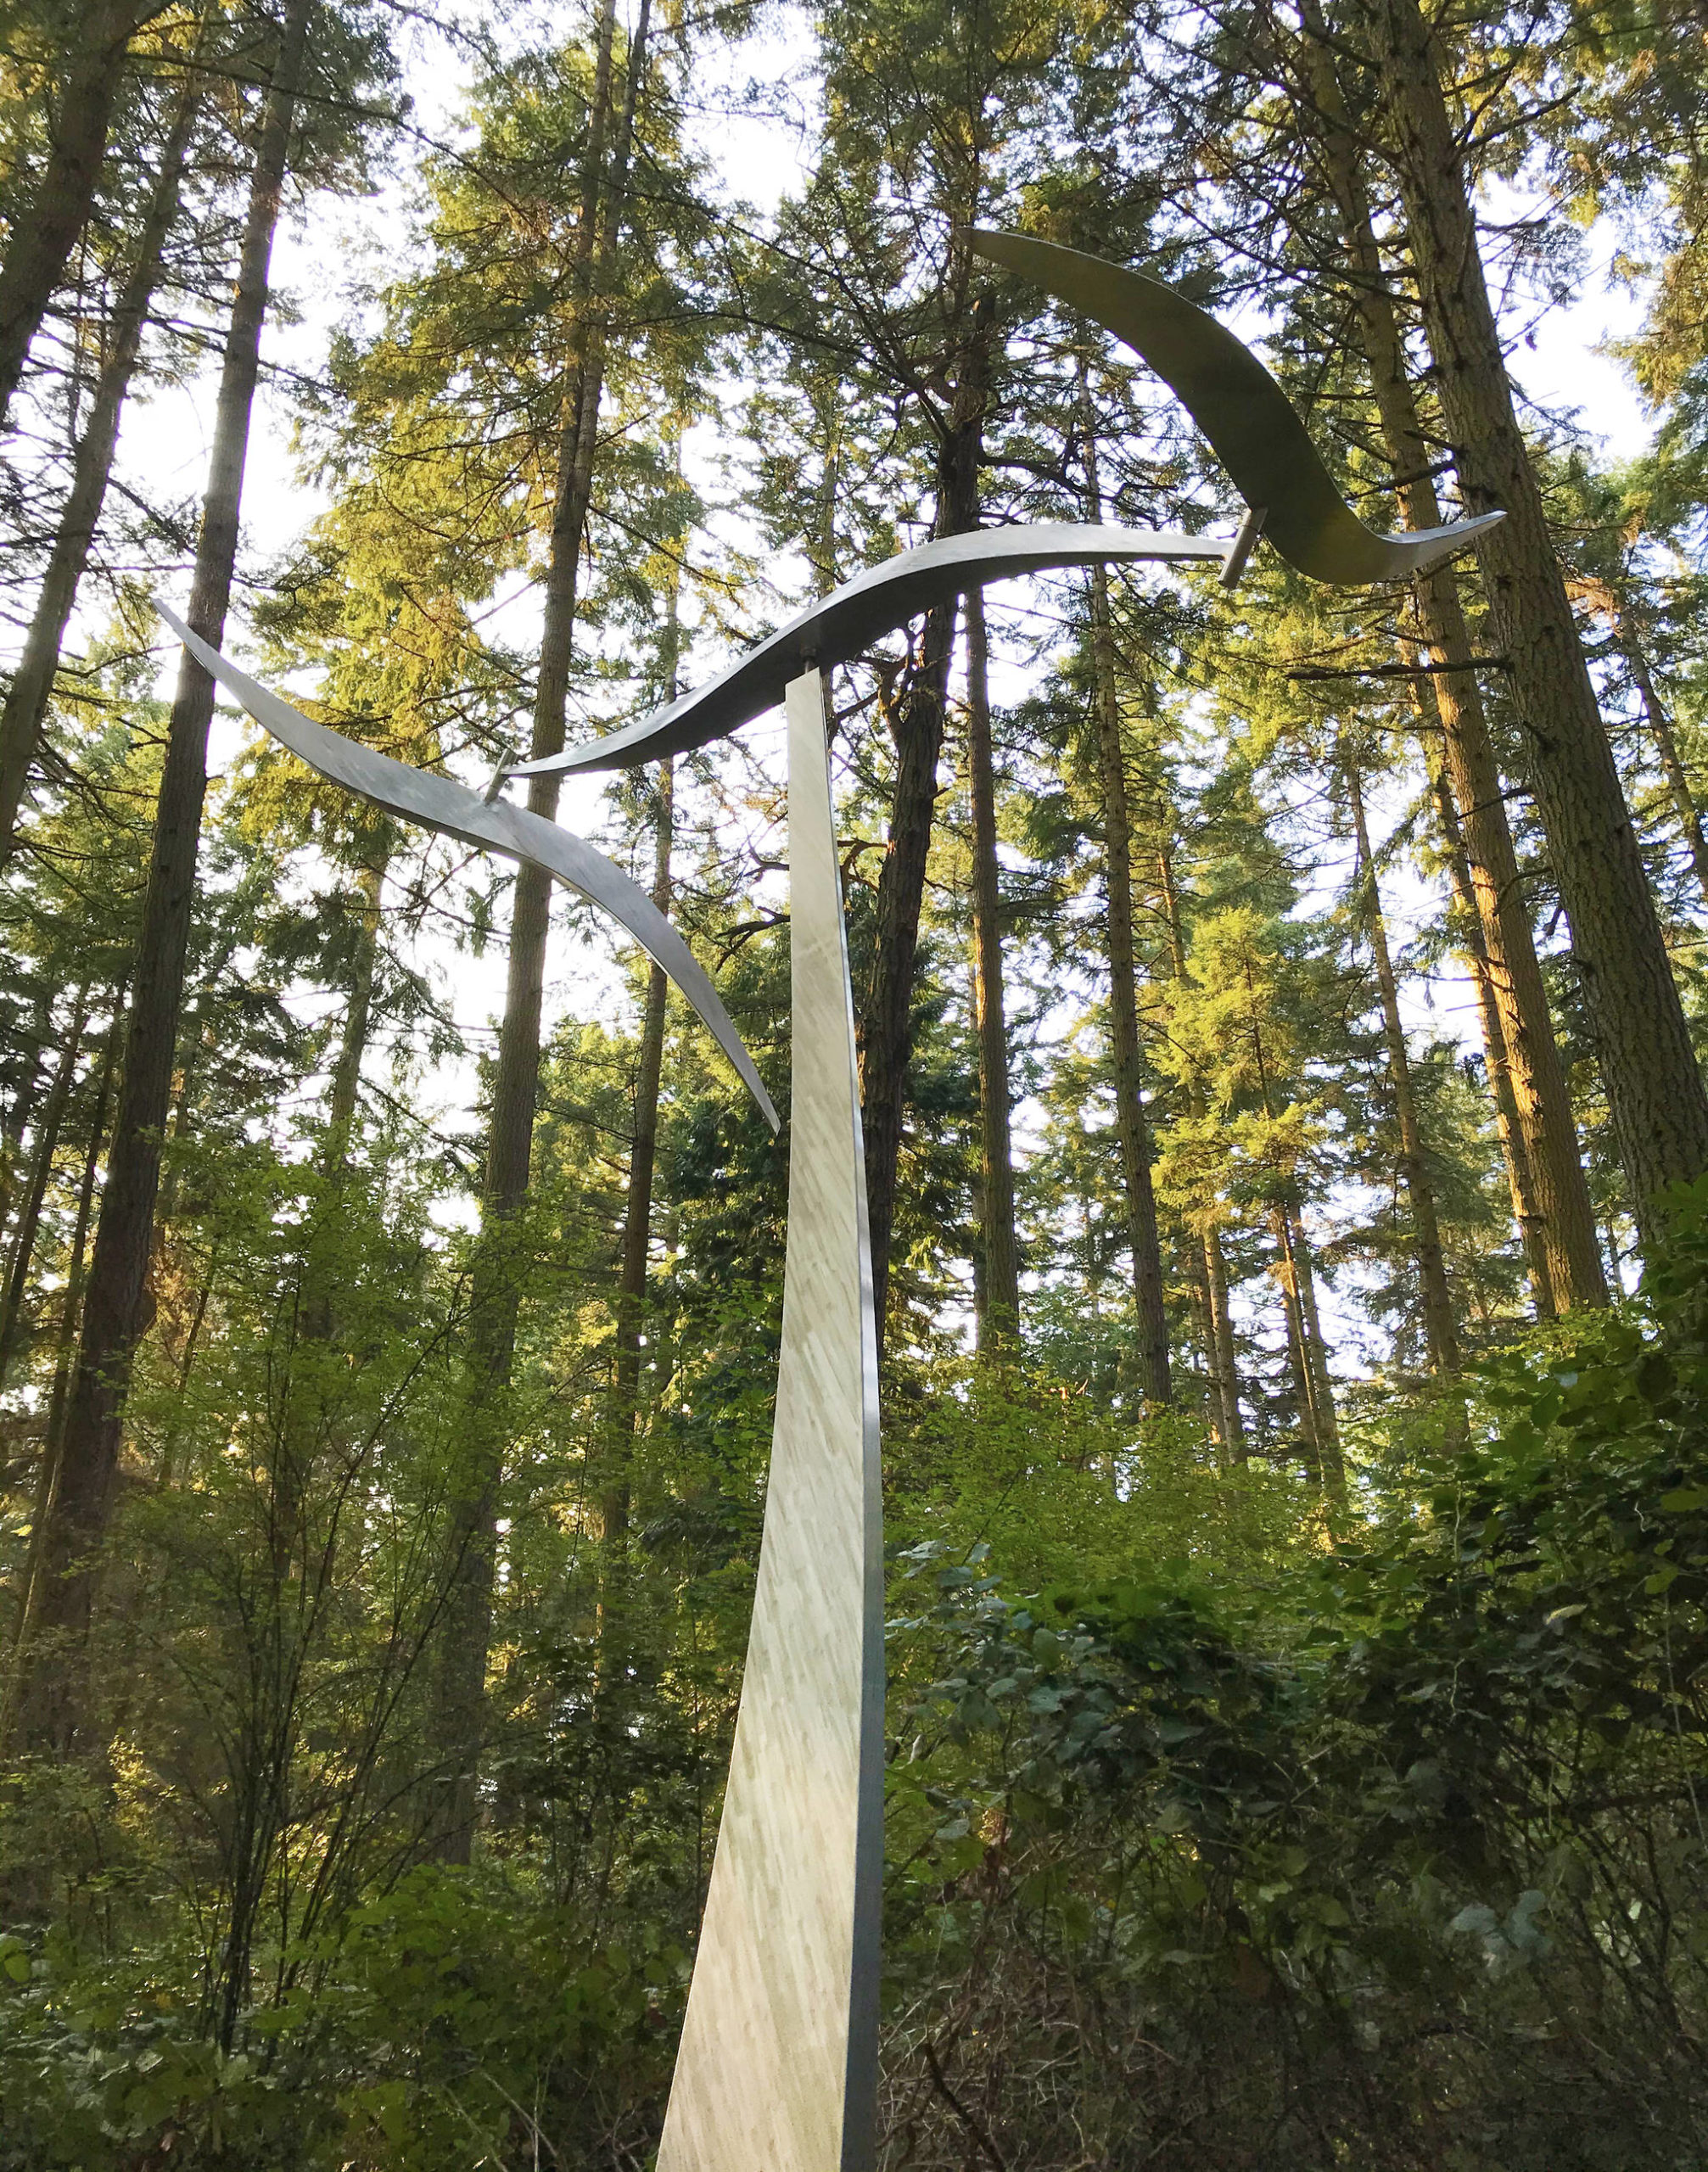 Image of Kahn Wind Shear at the Price Sculpture Forest by Jeff Kahn.